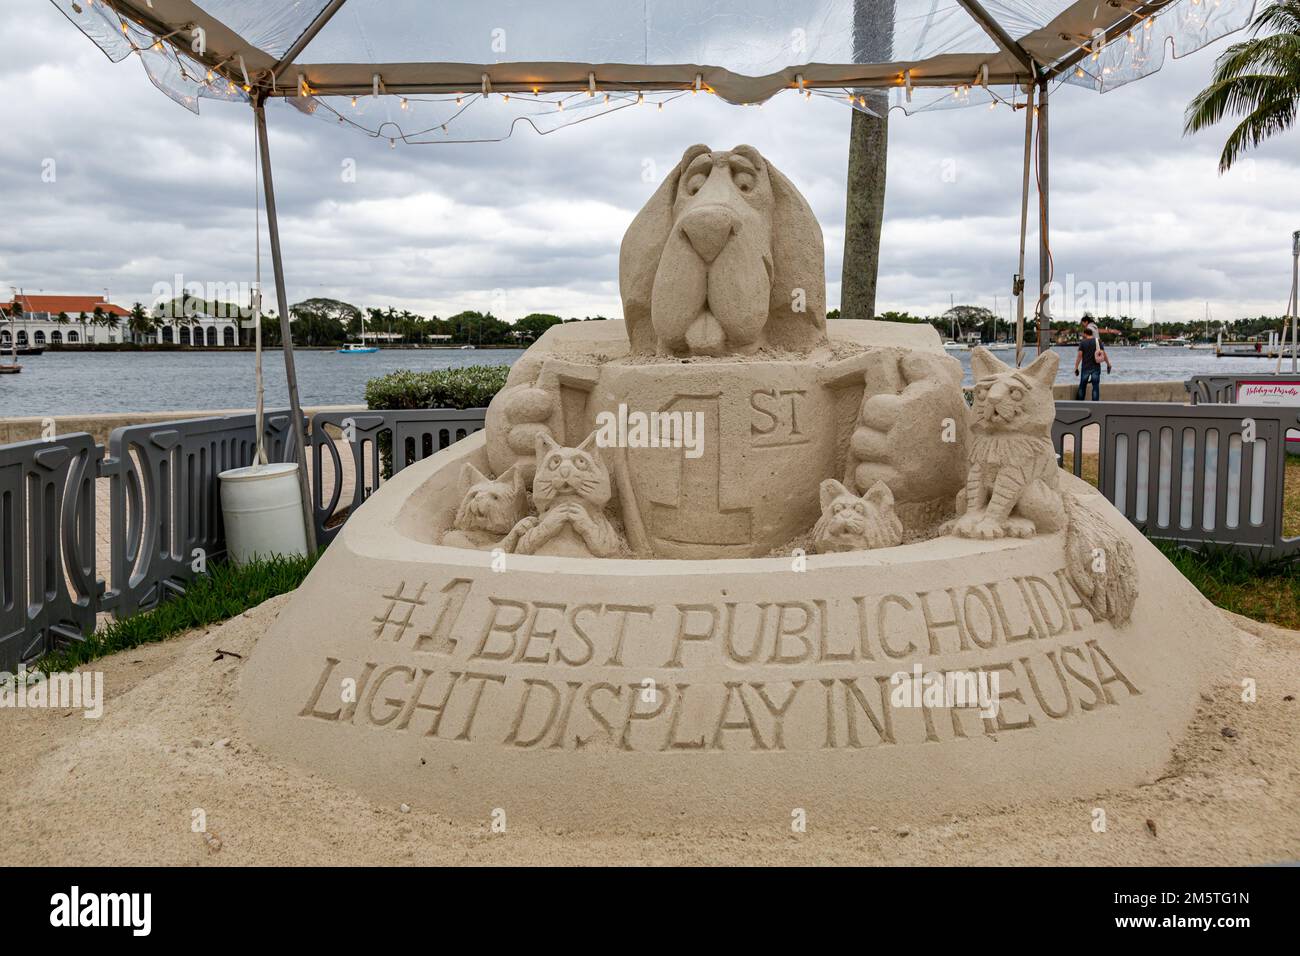 A sand sculpture by Mark Mason and Team Sandtastic celebrates the award for best public holiday light display in the USA in West Palm Beach, Florida. Stock Photo